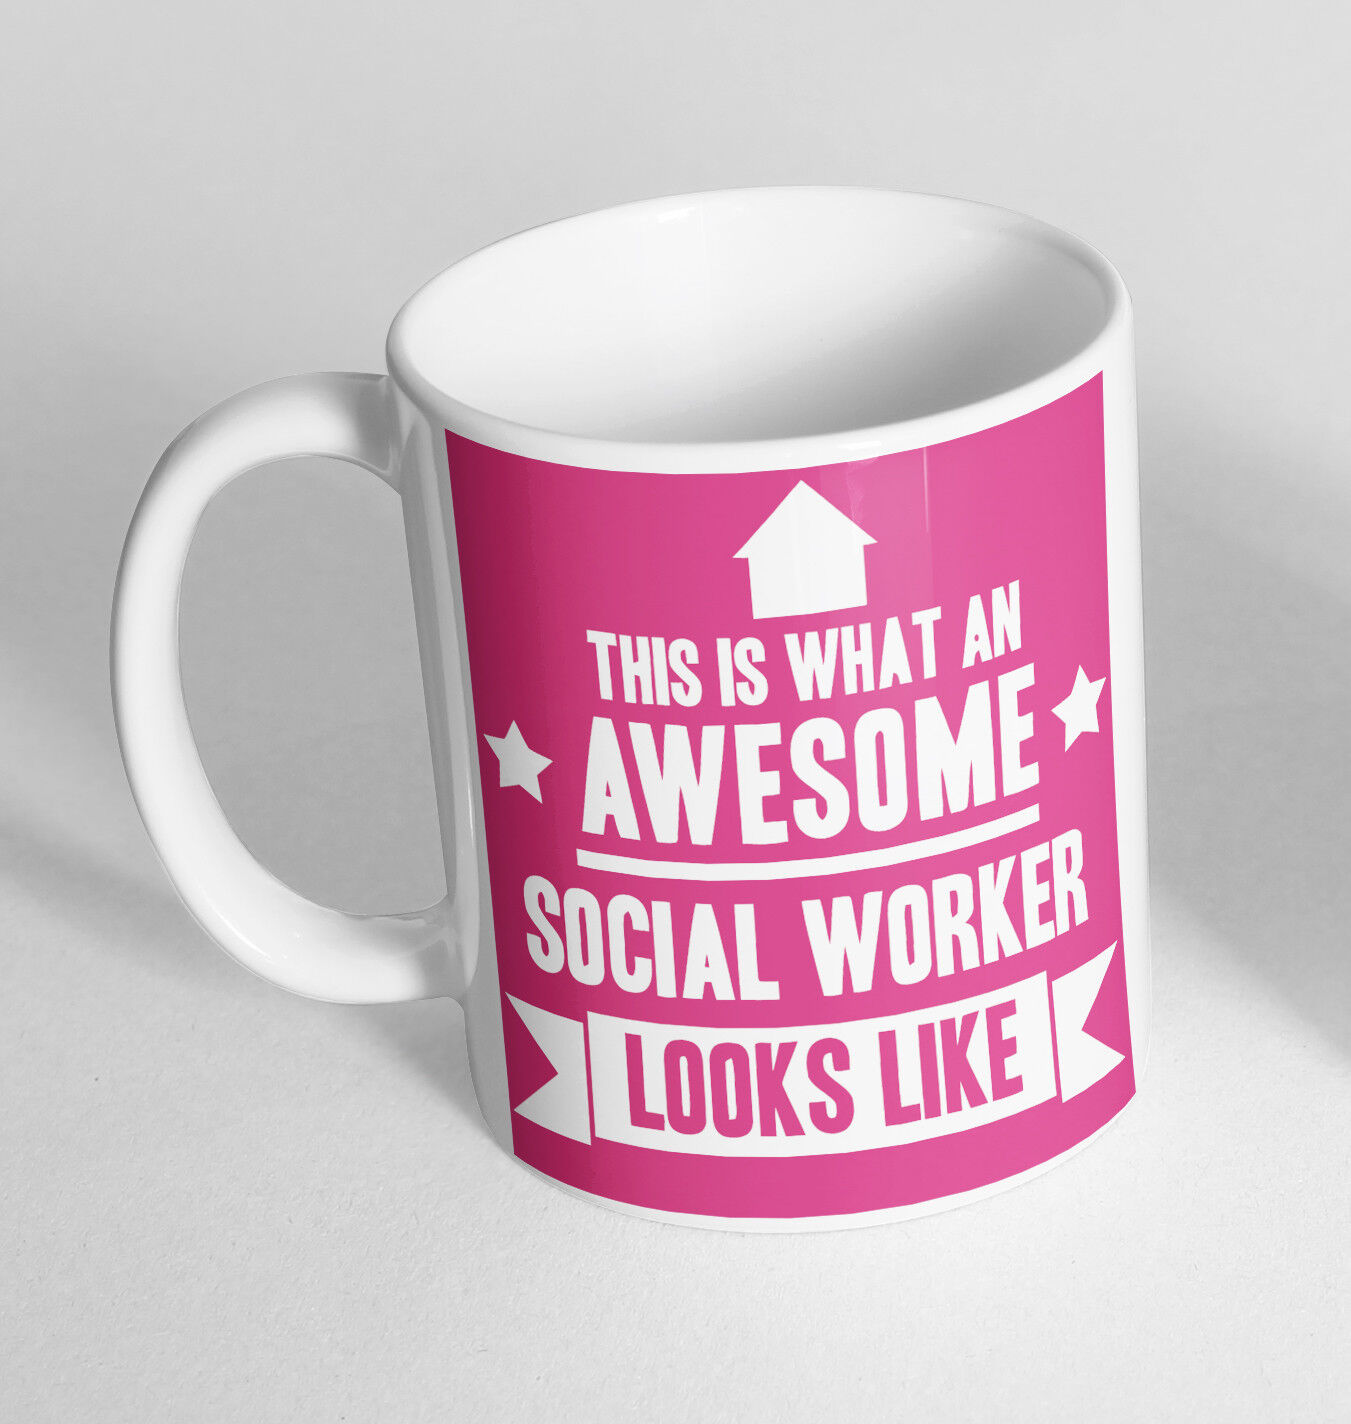  Awesome Social Worker Printed Cup Ceramic Novelty Mug Funny Gift Coffee Tea